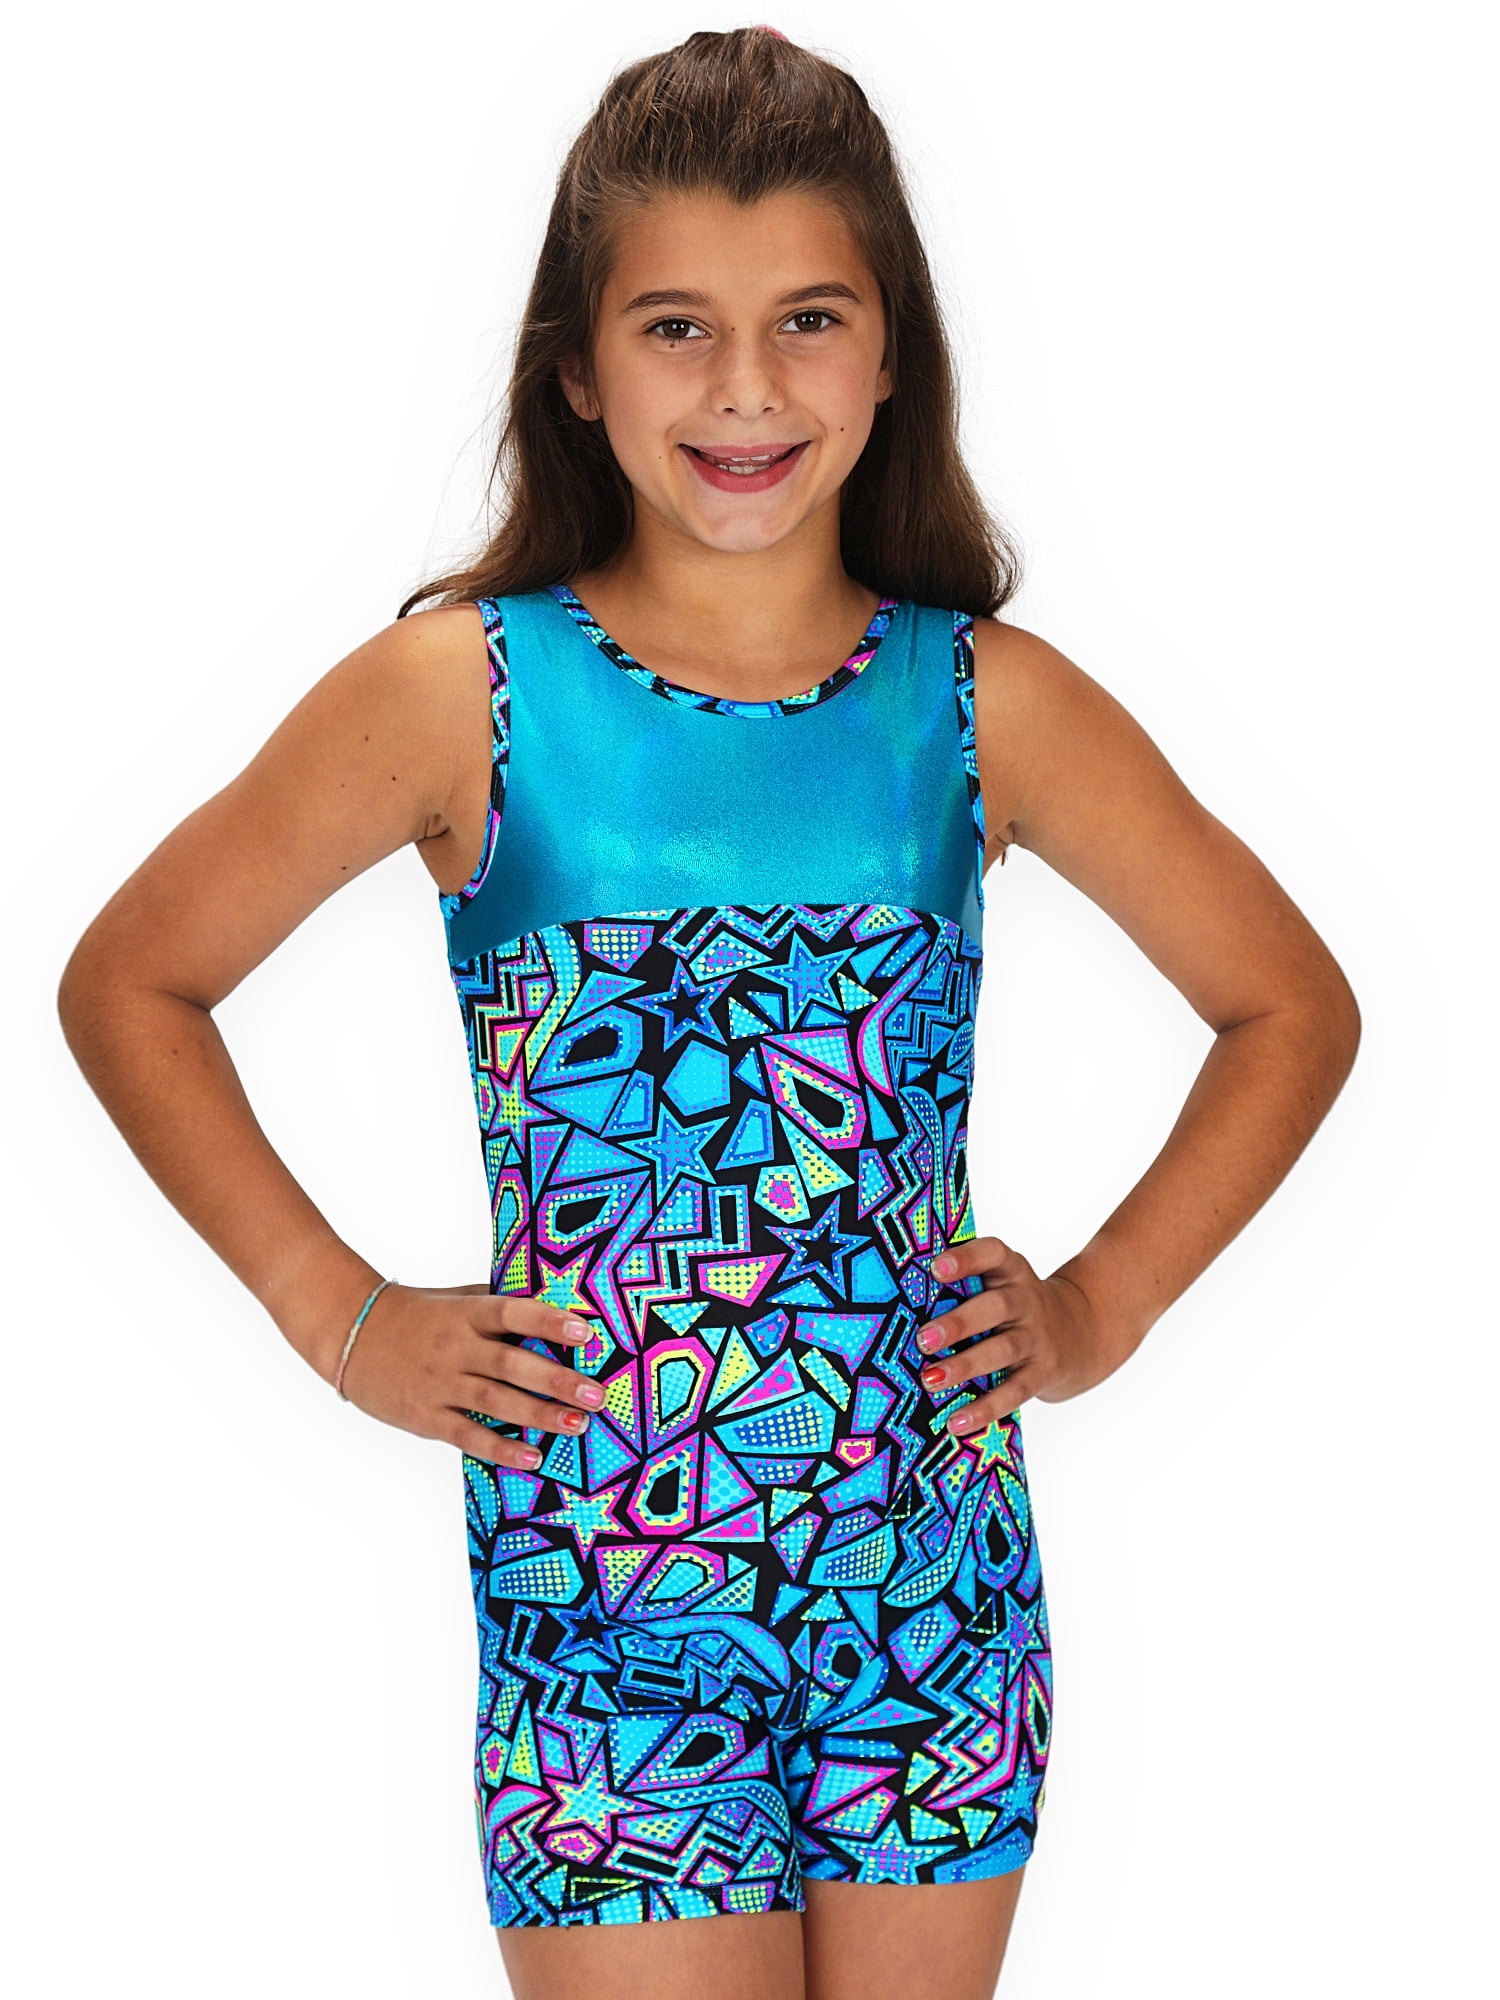 Teal Blue and Green Collection Leap Gear Gymnastics Biketard/Unitard for Girls Turquoise